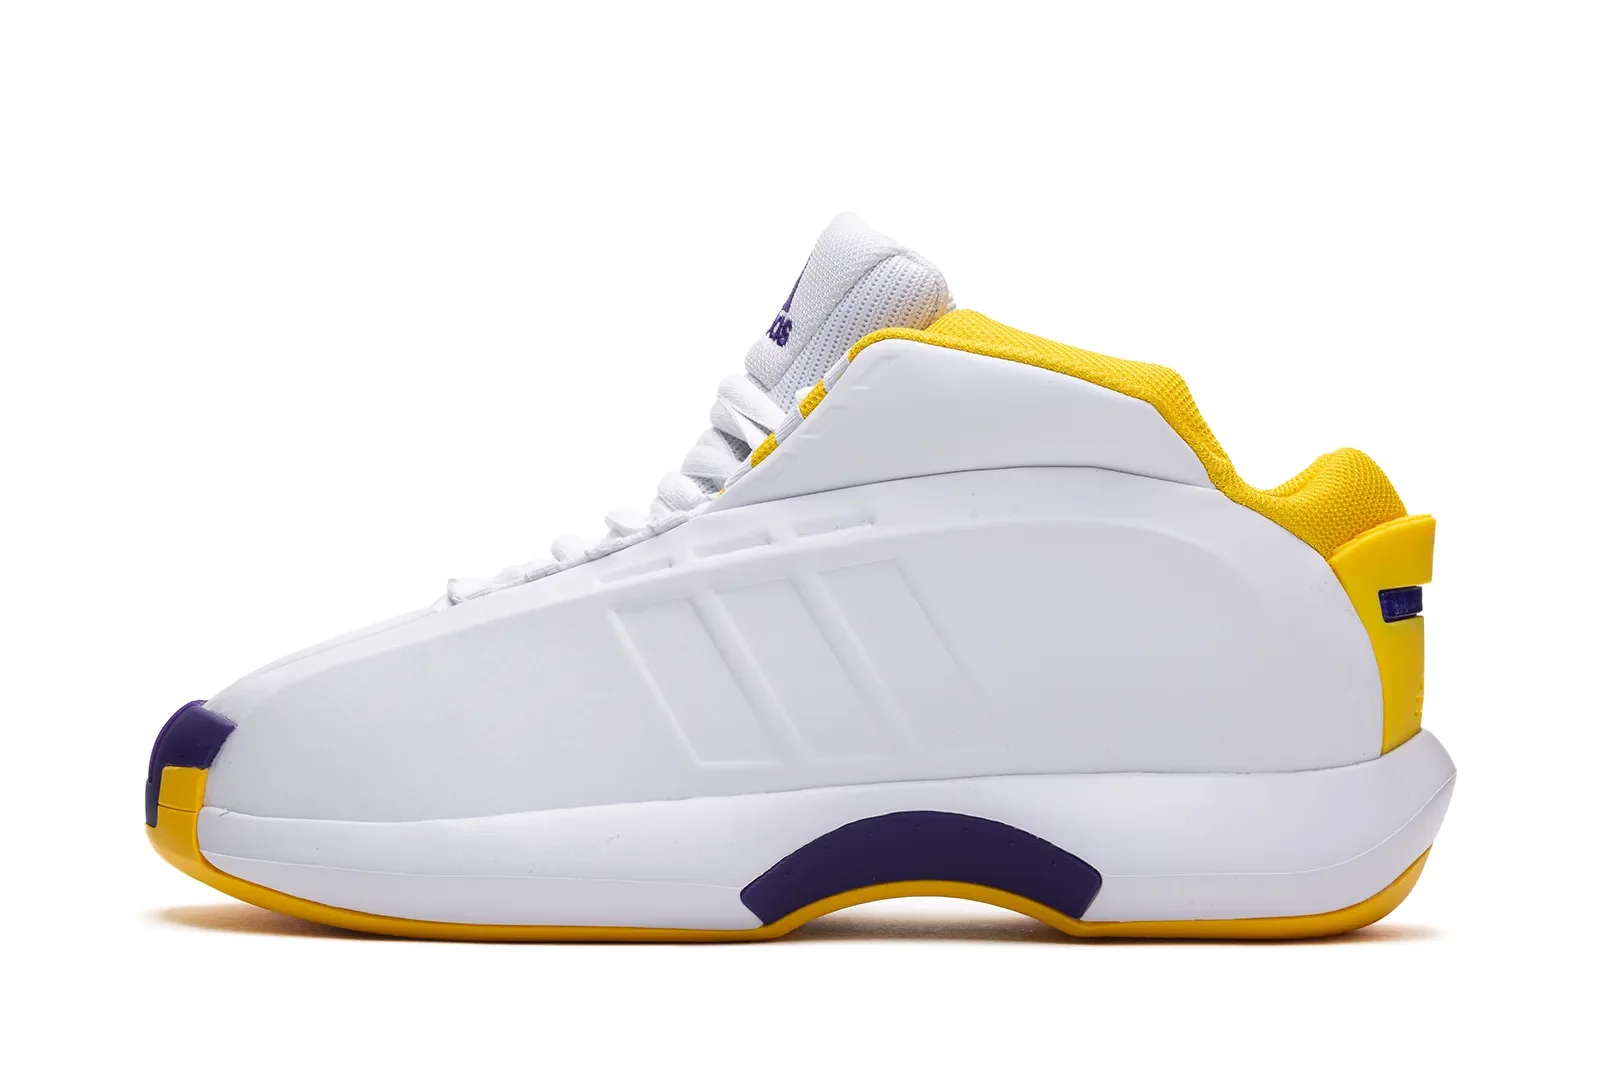 Kobe adidas Crazy 1 Lakers Home GY8947 Release Date